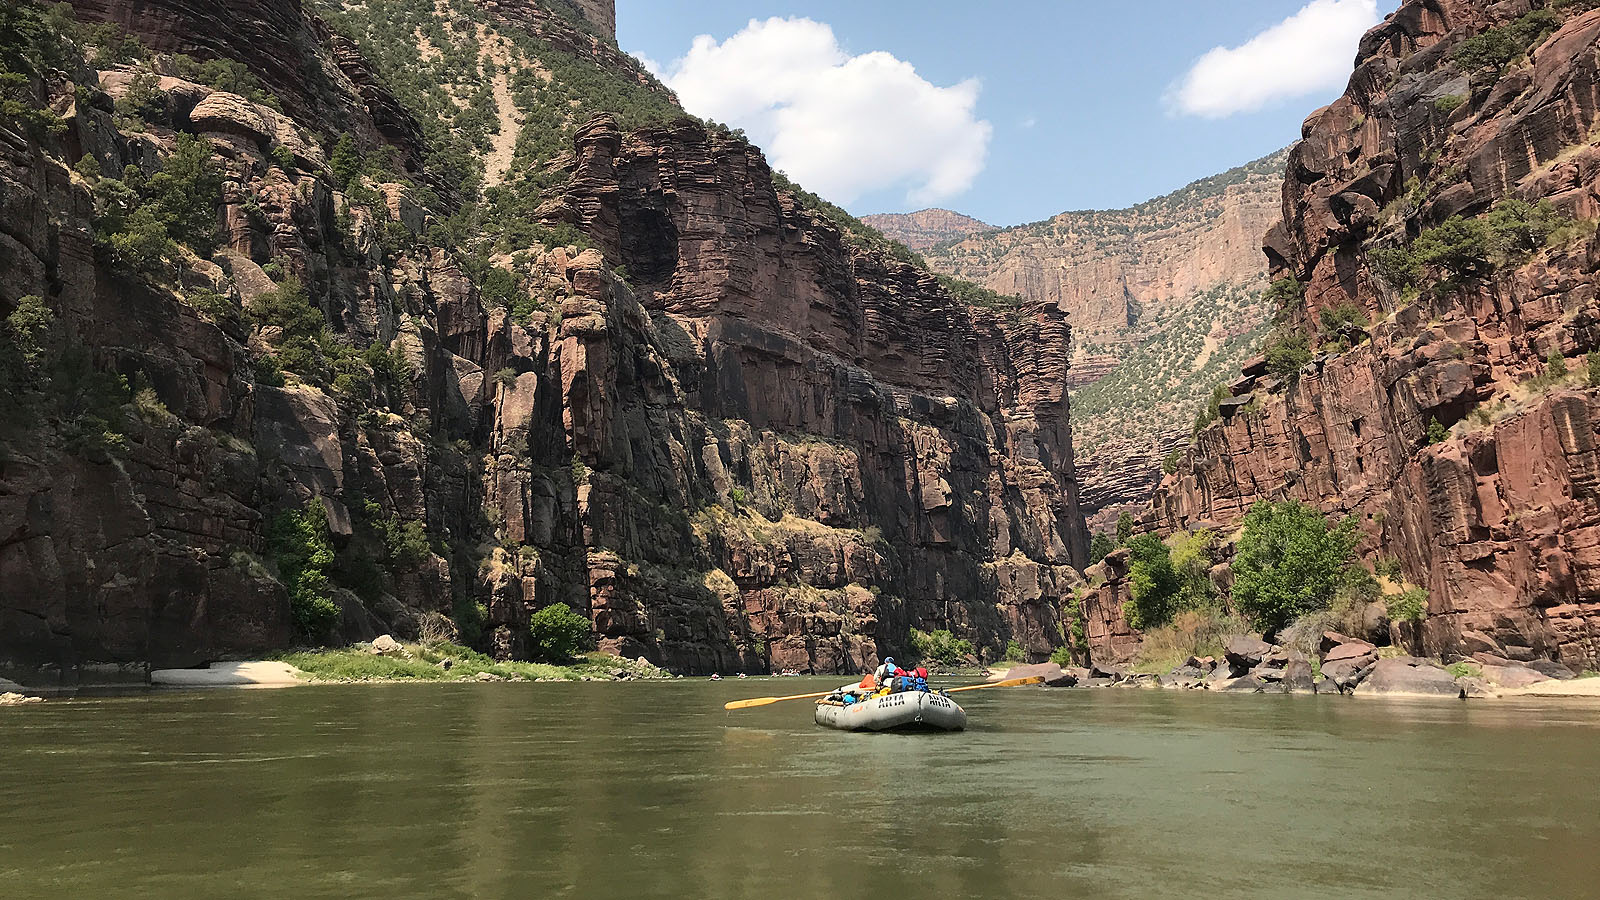 Floating downstream on the Green River in Dinosaur National Monument